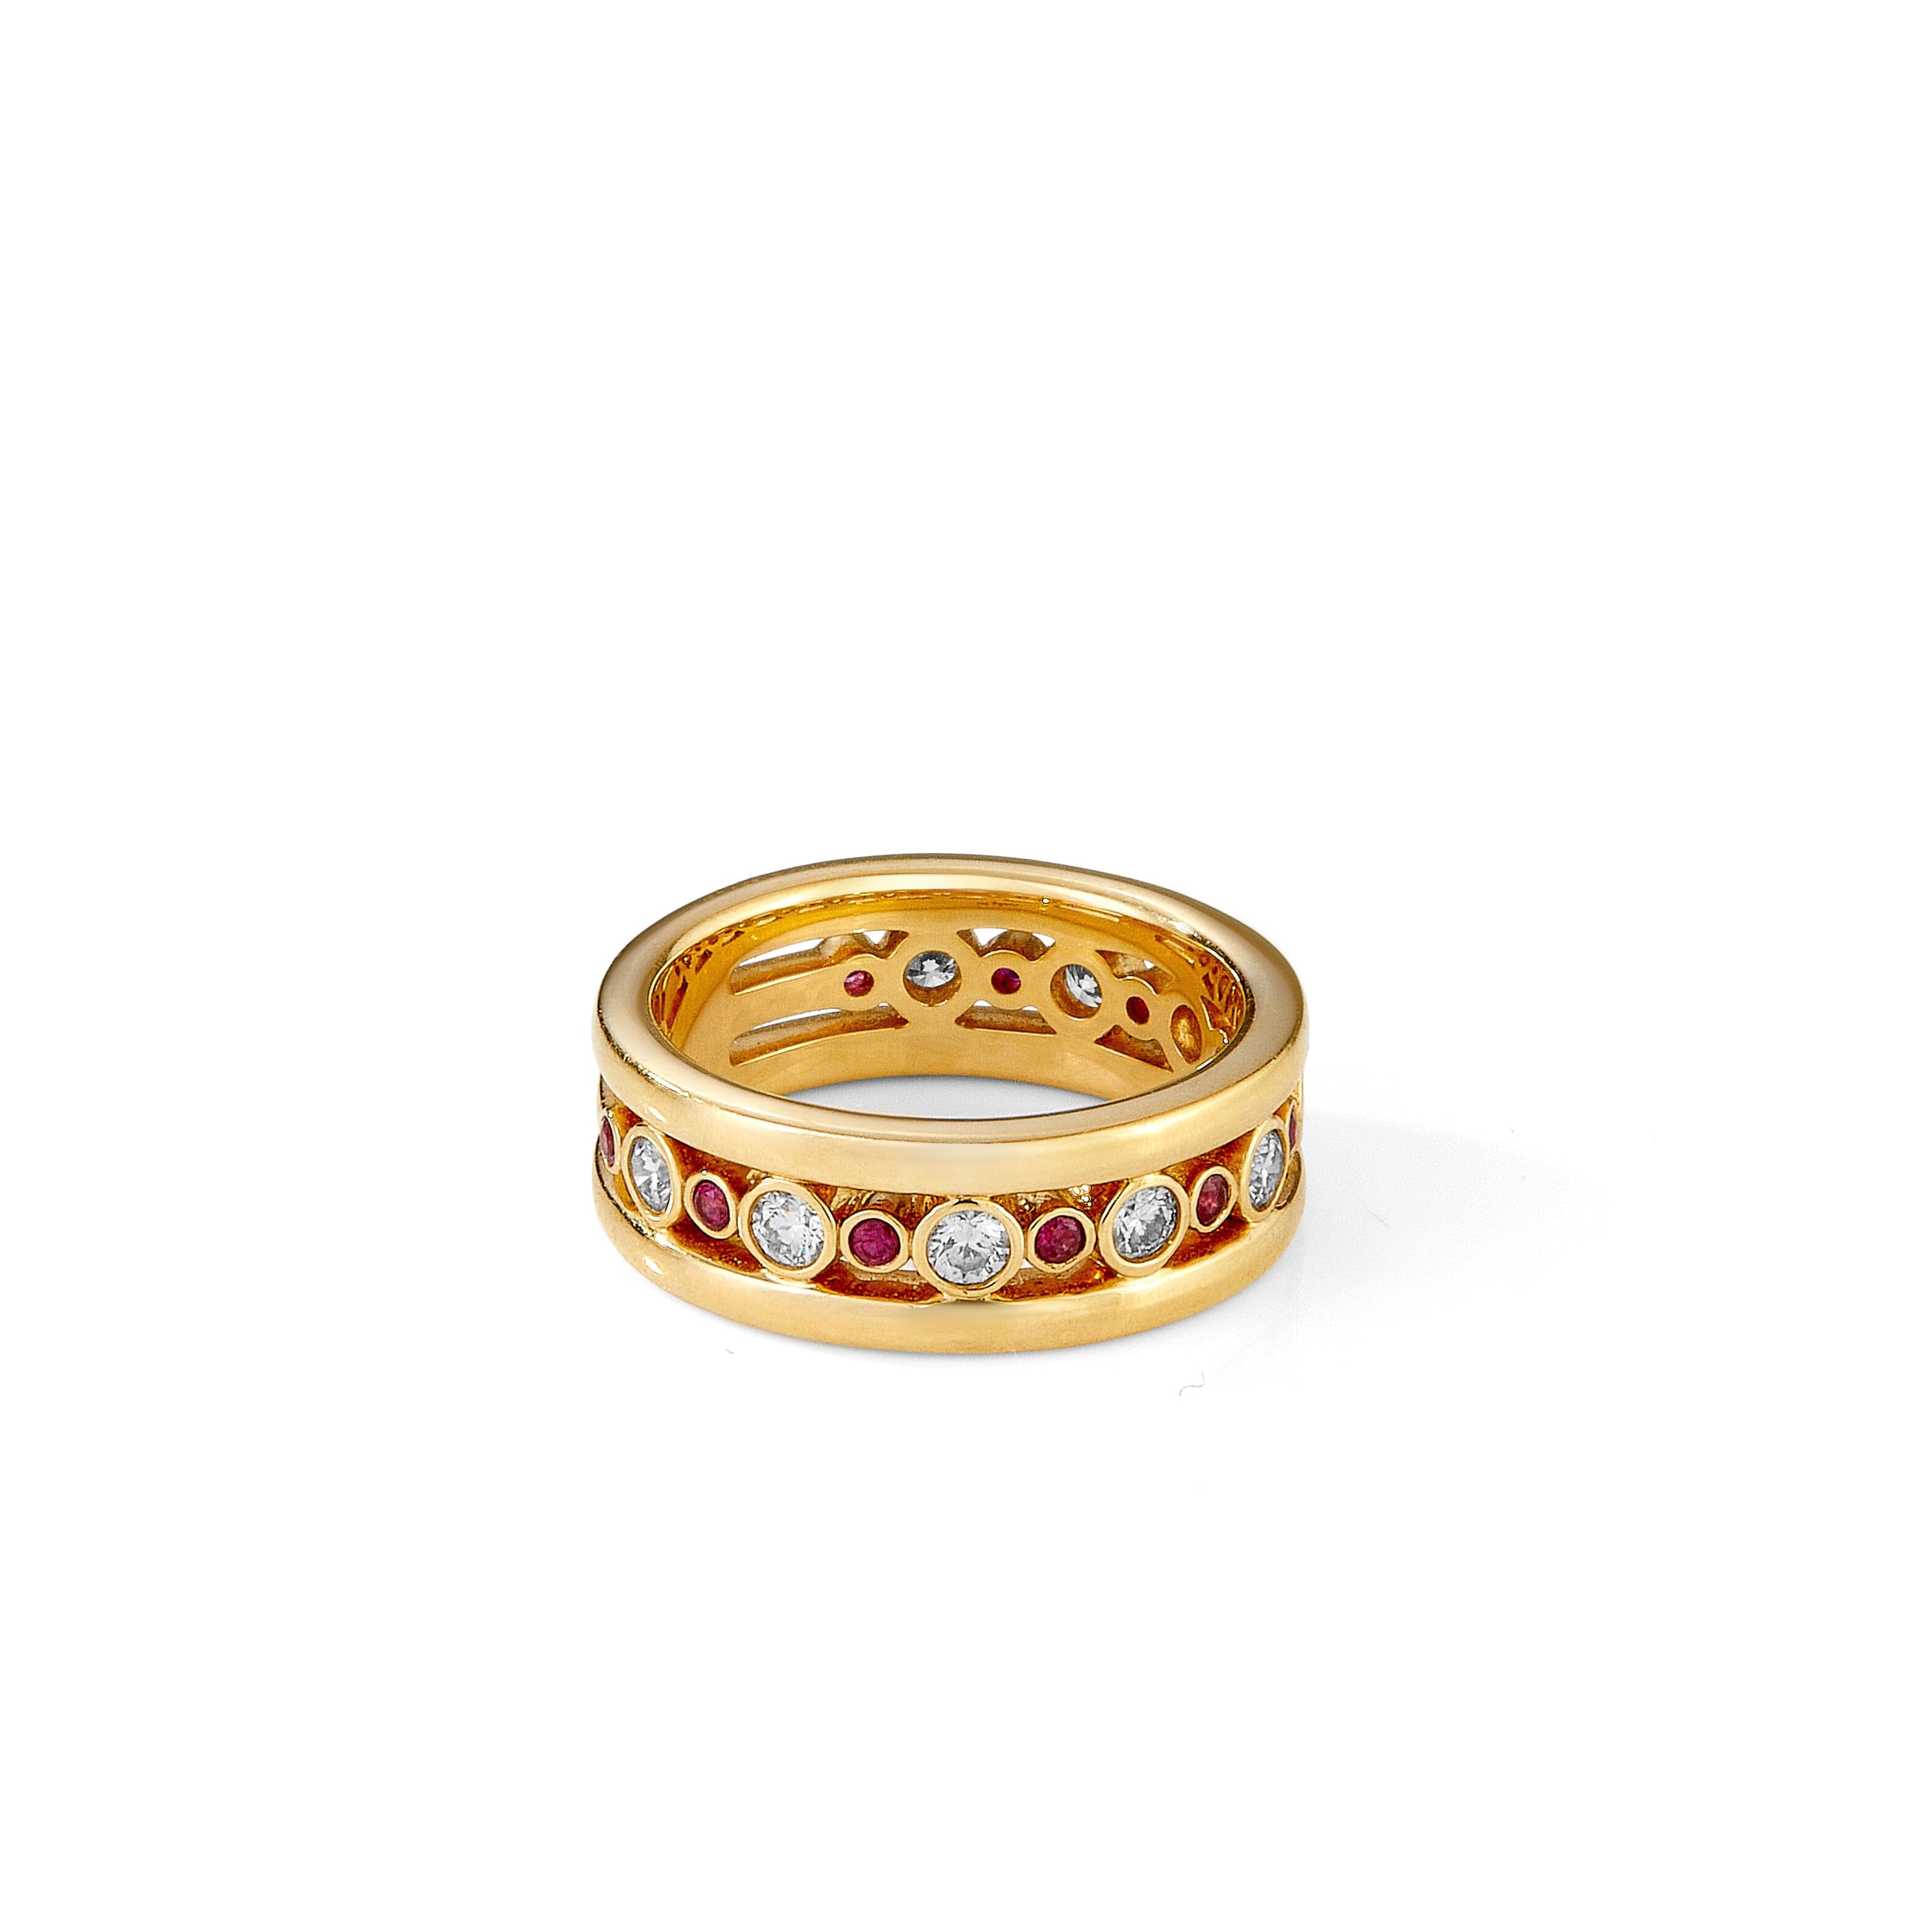 Mogul Diamond Band and Ruby Ring in 18K Gold - Discover SYNA JEWELS
– SYNAJEWELS